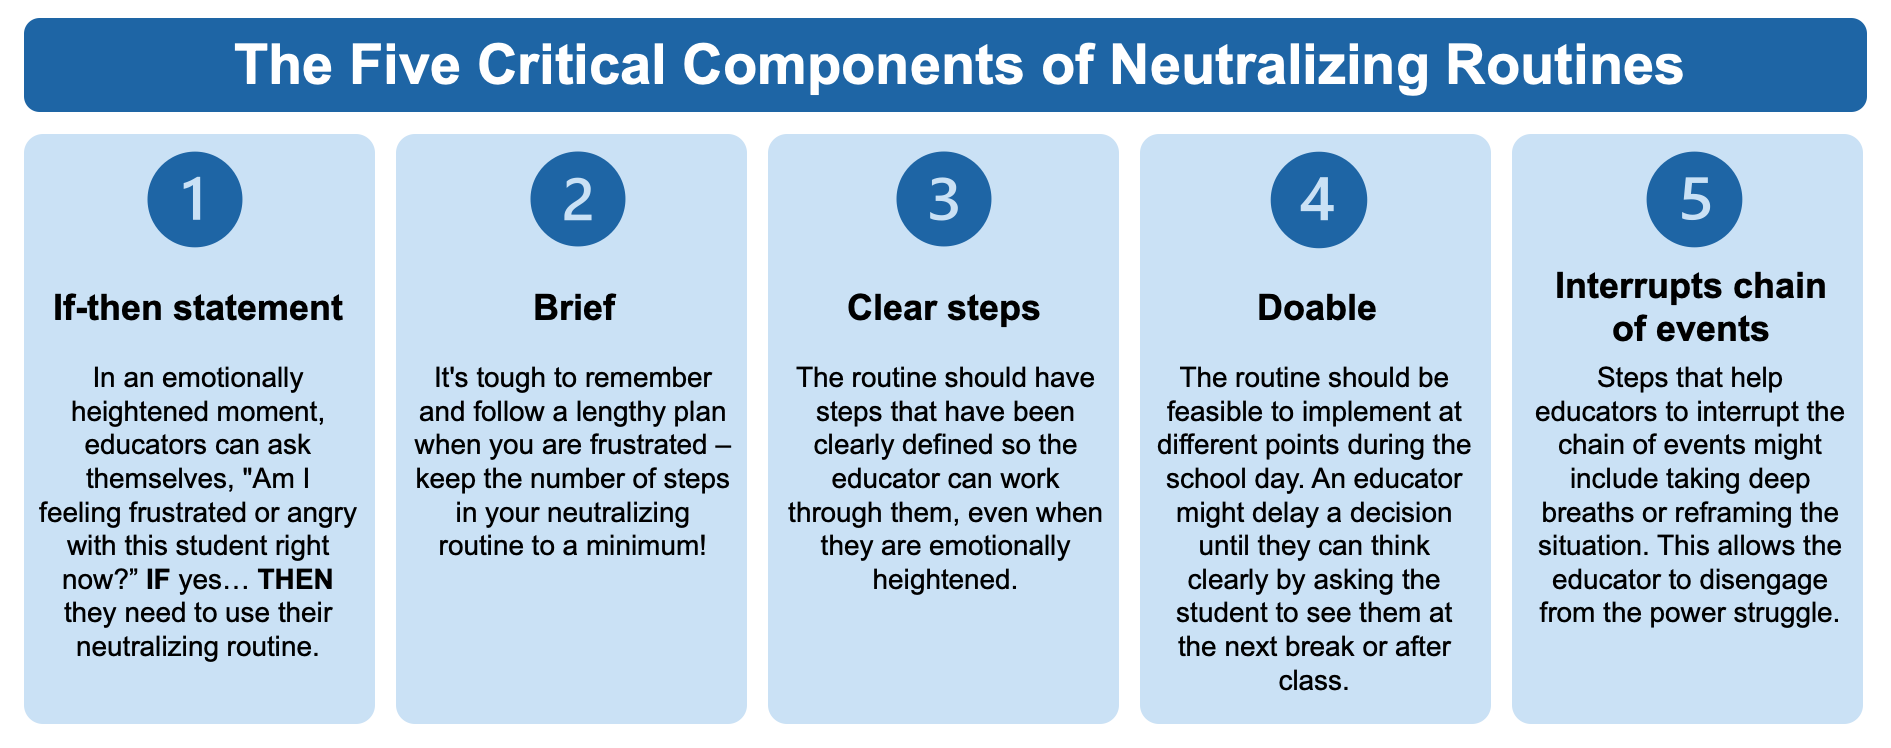 Graphic showing the The Five Critical Components of Neutralizing Routines. 1) If-then statement: In an emotionally heightened moment, educators can ask themselves, 